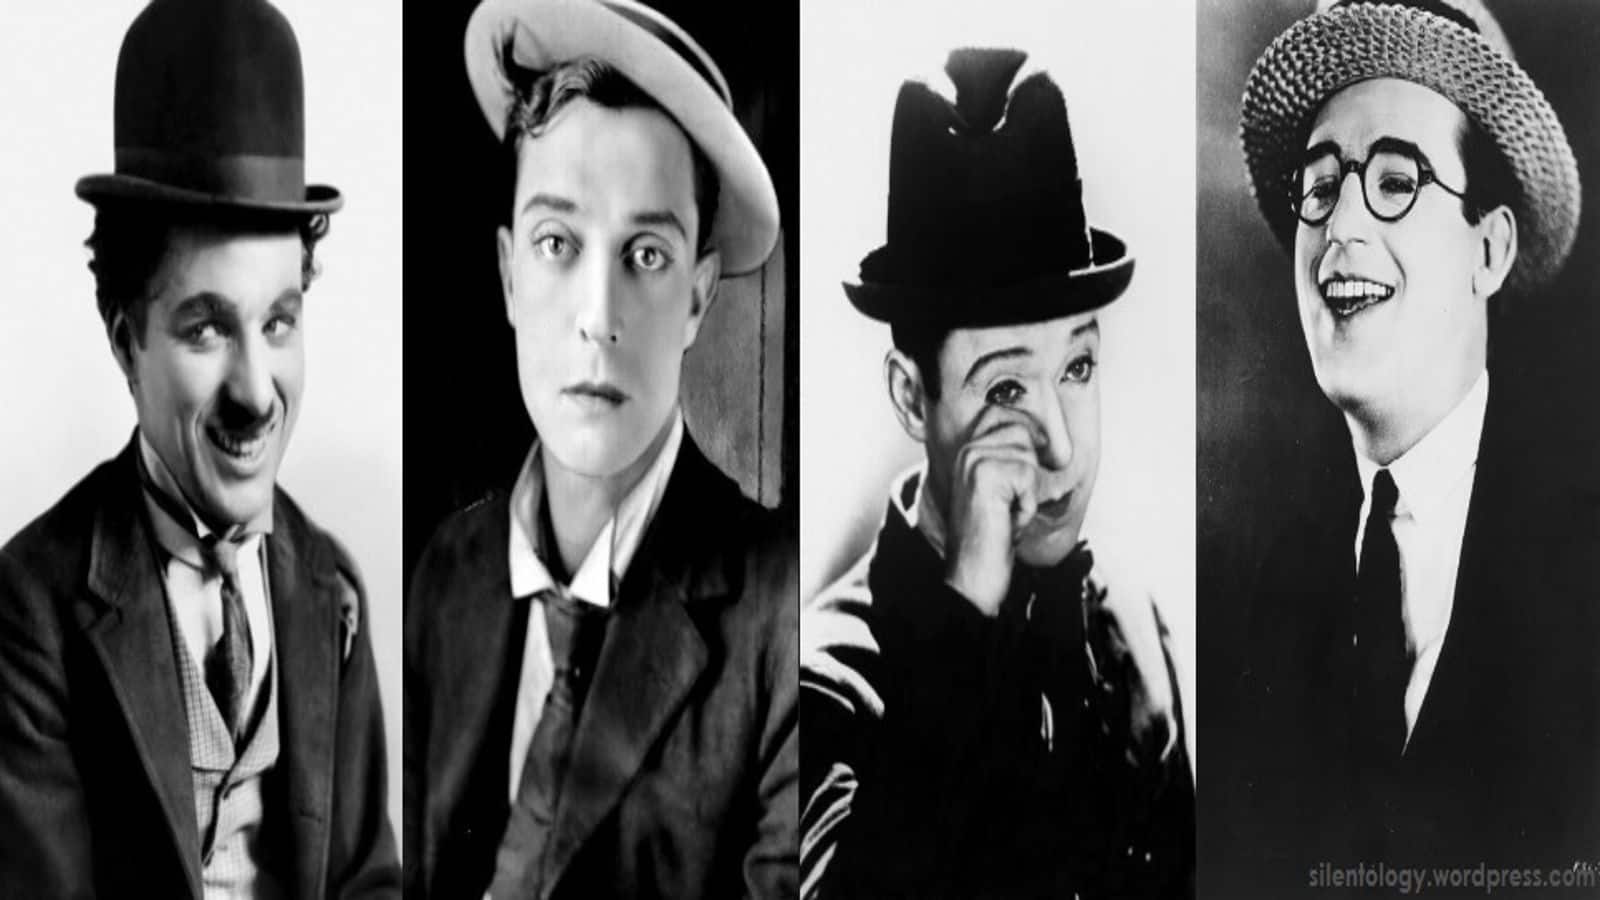 Step back in time with silent era's comedy classics